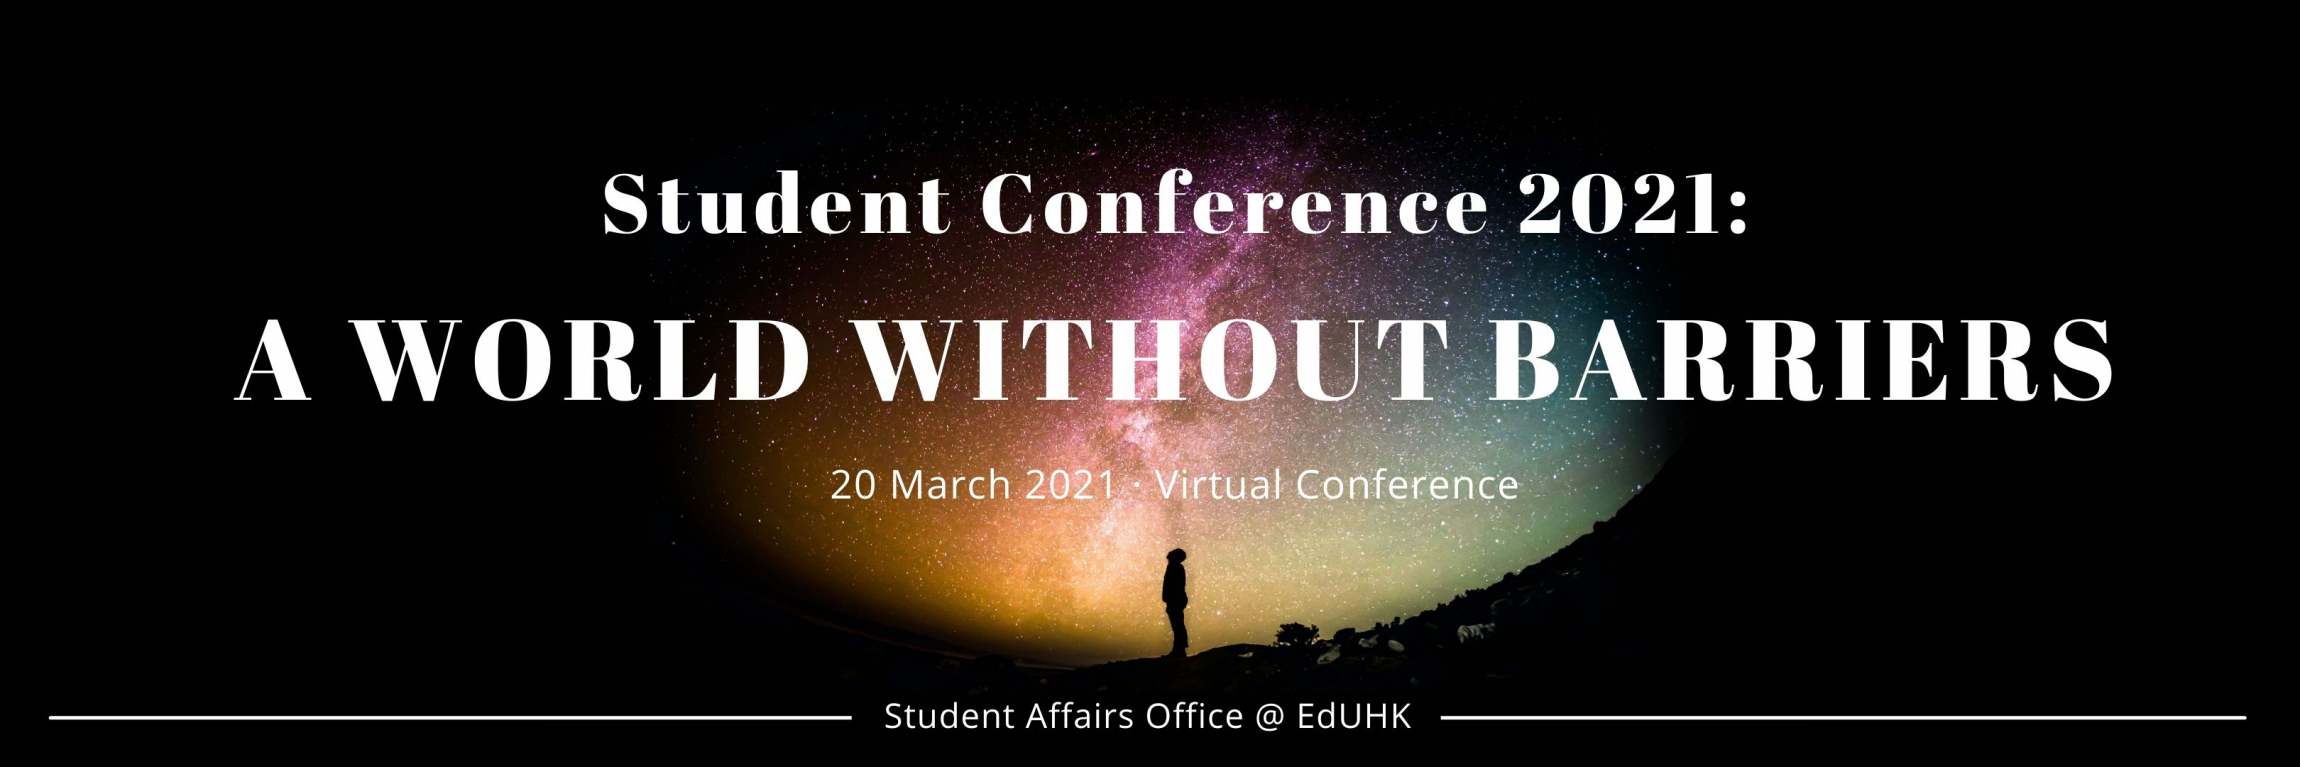 Public Photos / Files - Student Conference